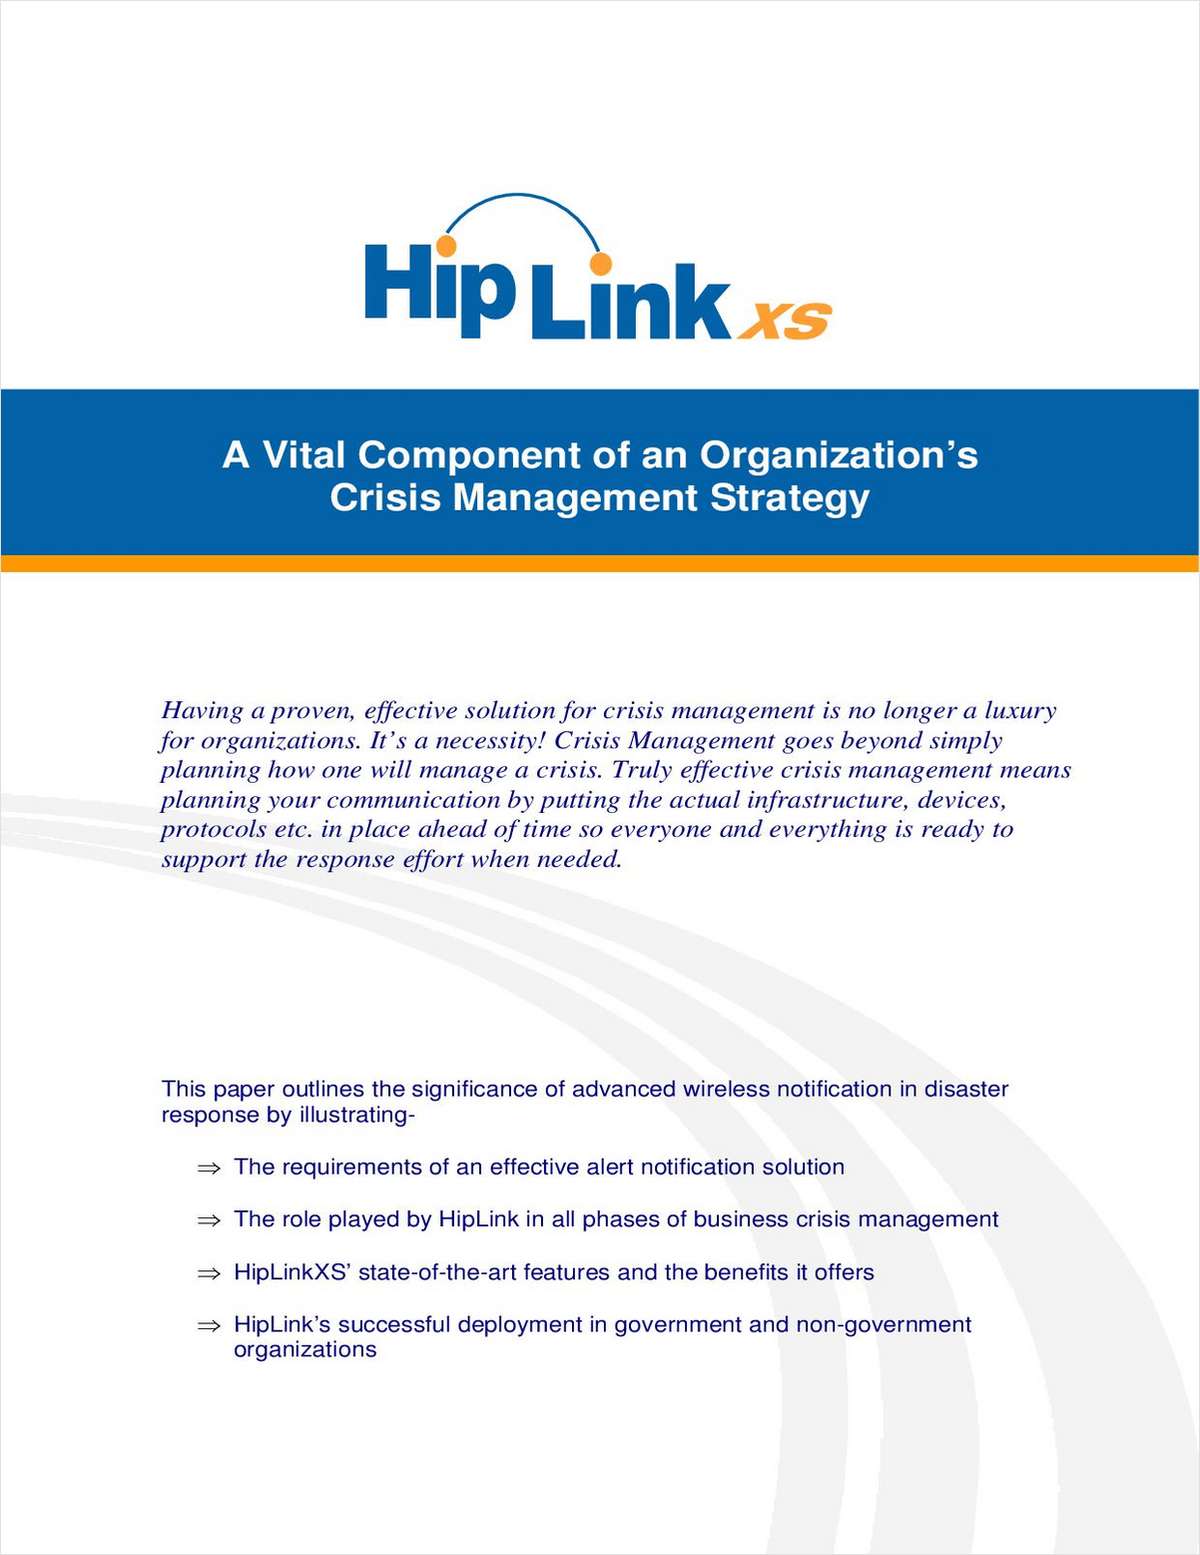 HipLinkXS® - A Vital Component of an Organization's Crisis Management Strategy